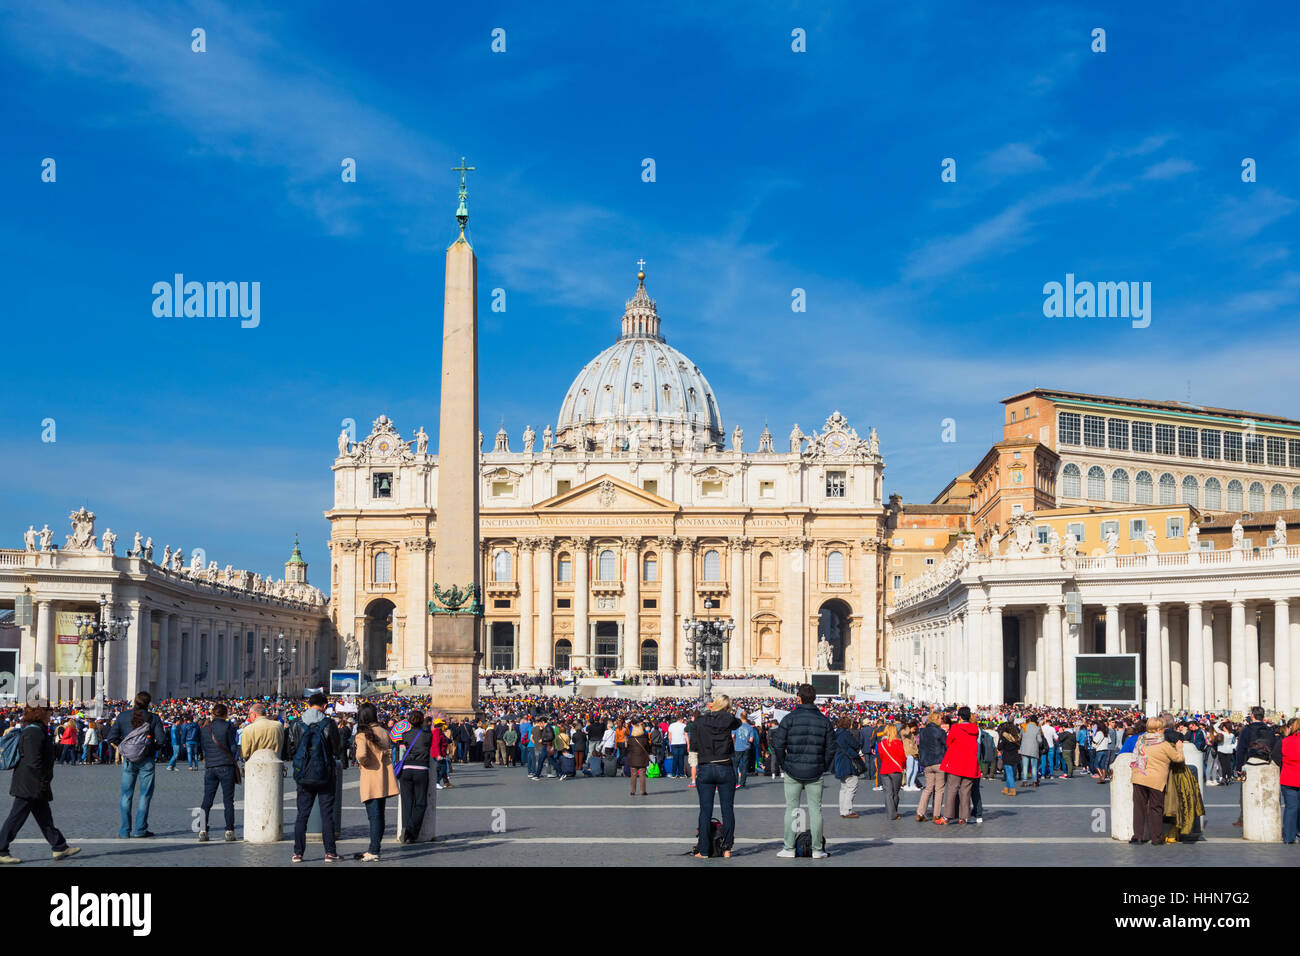 Rome, Italy. St Peter's Basilica seen across St Peter's Square.  The historical centre of Rome, including the Vatican, are a UNESCO World Heritage Sit Stock Photo